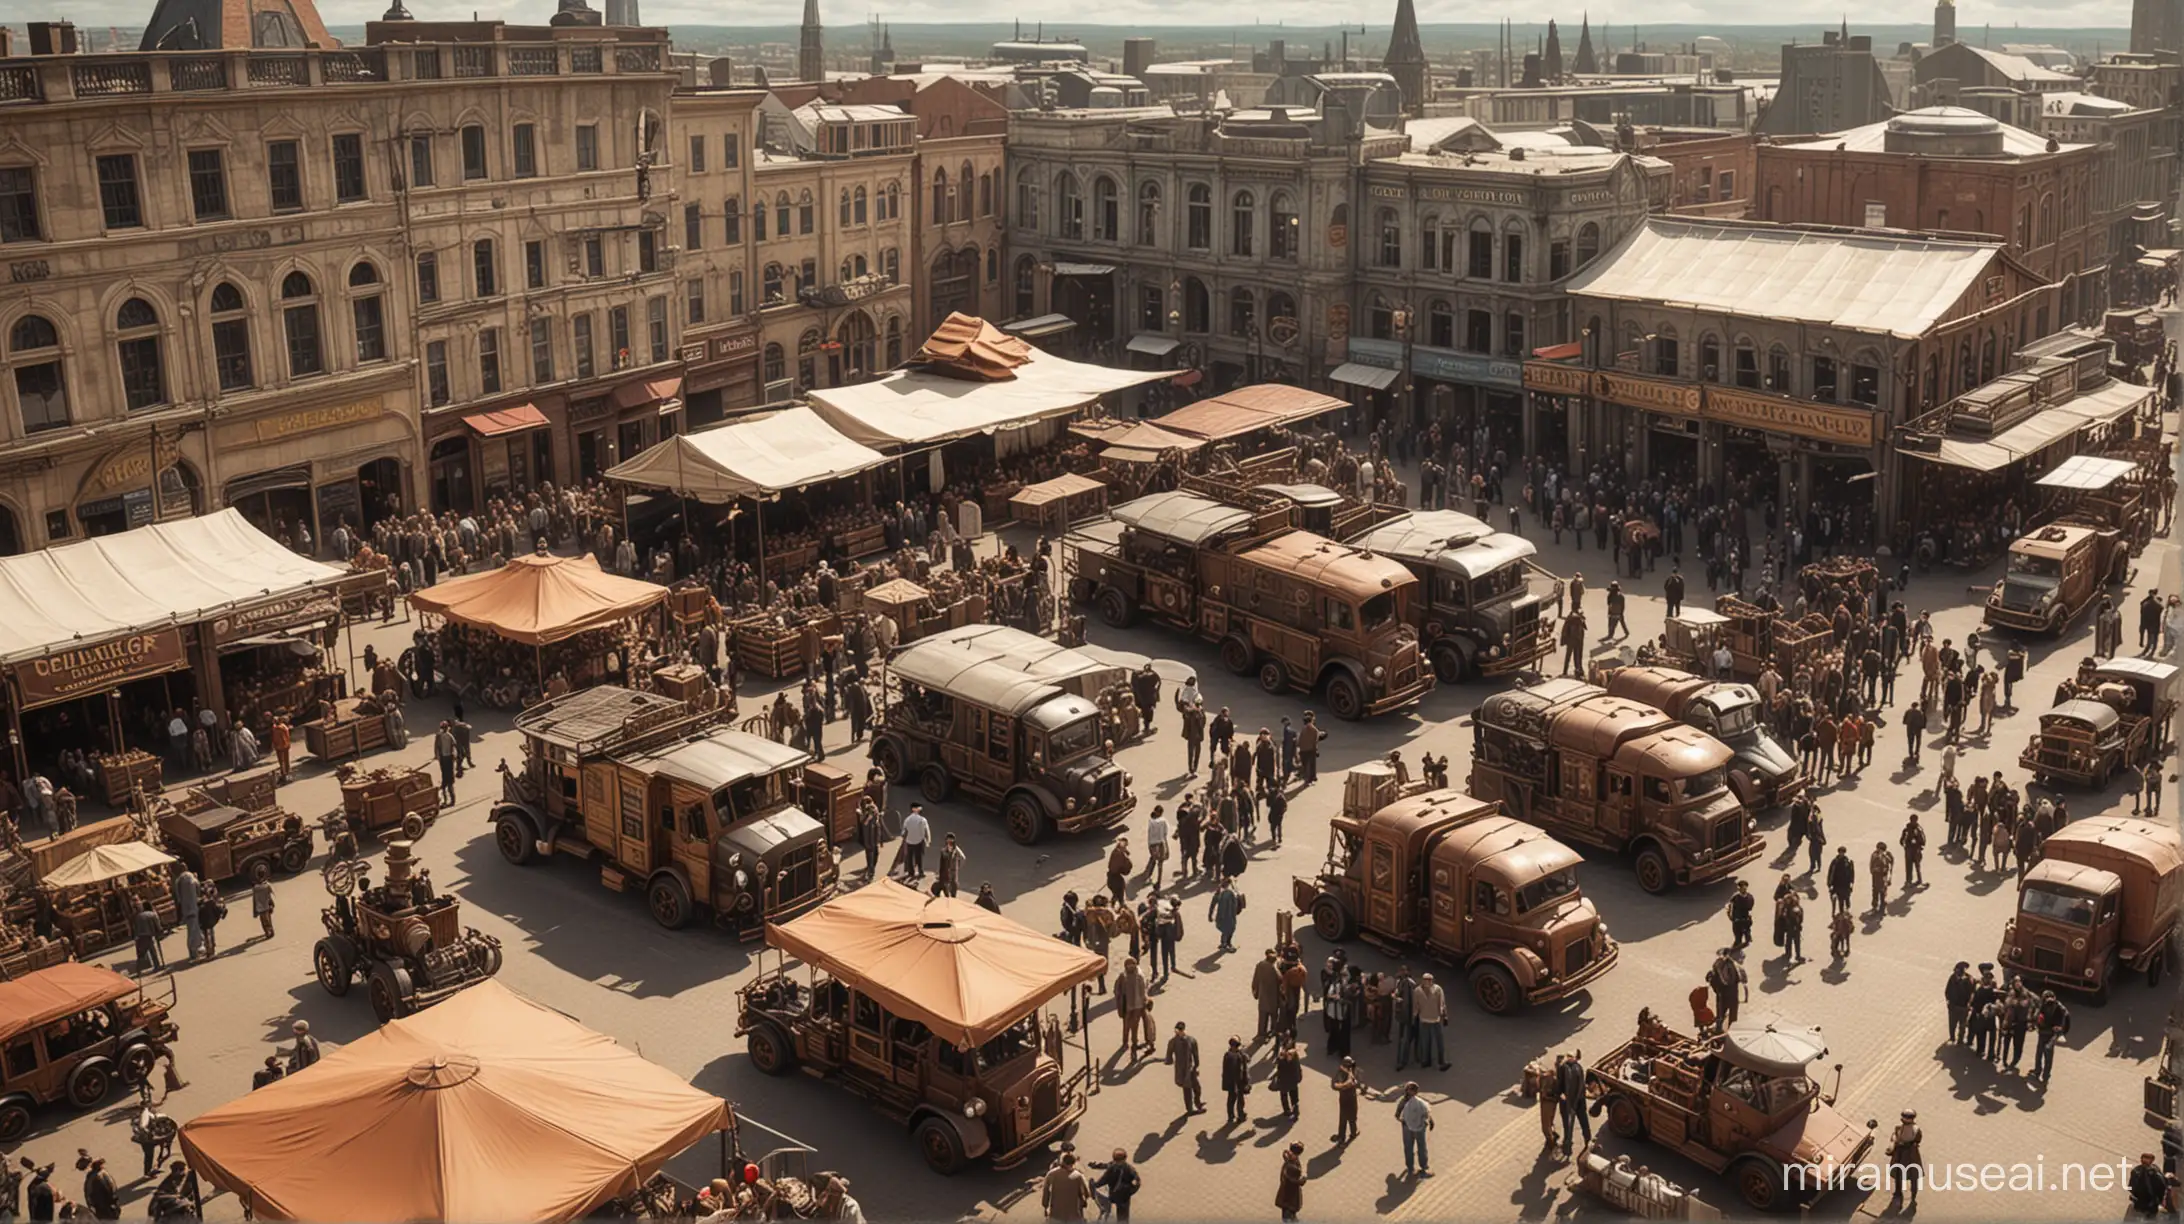 Steampunk Market Scene Bustling Marketplace from Above on a Sunny Day